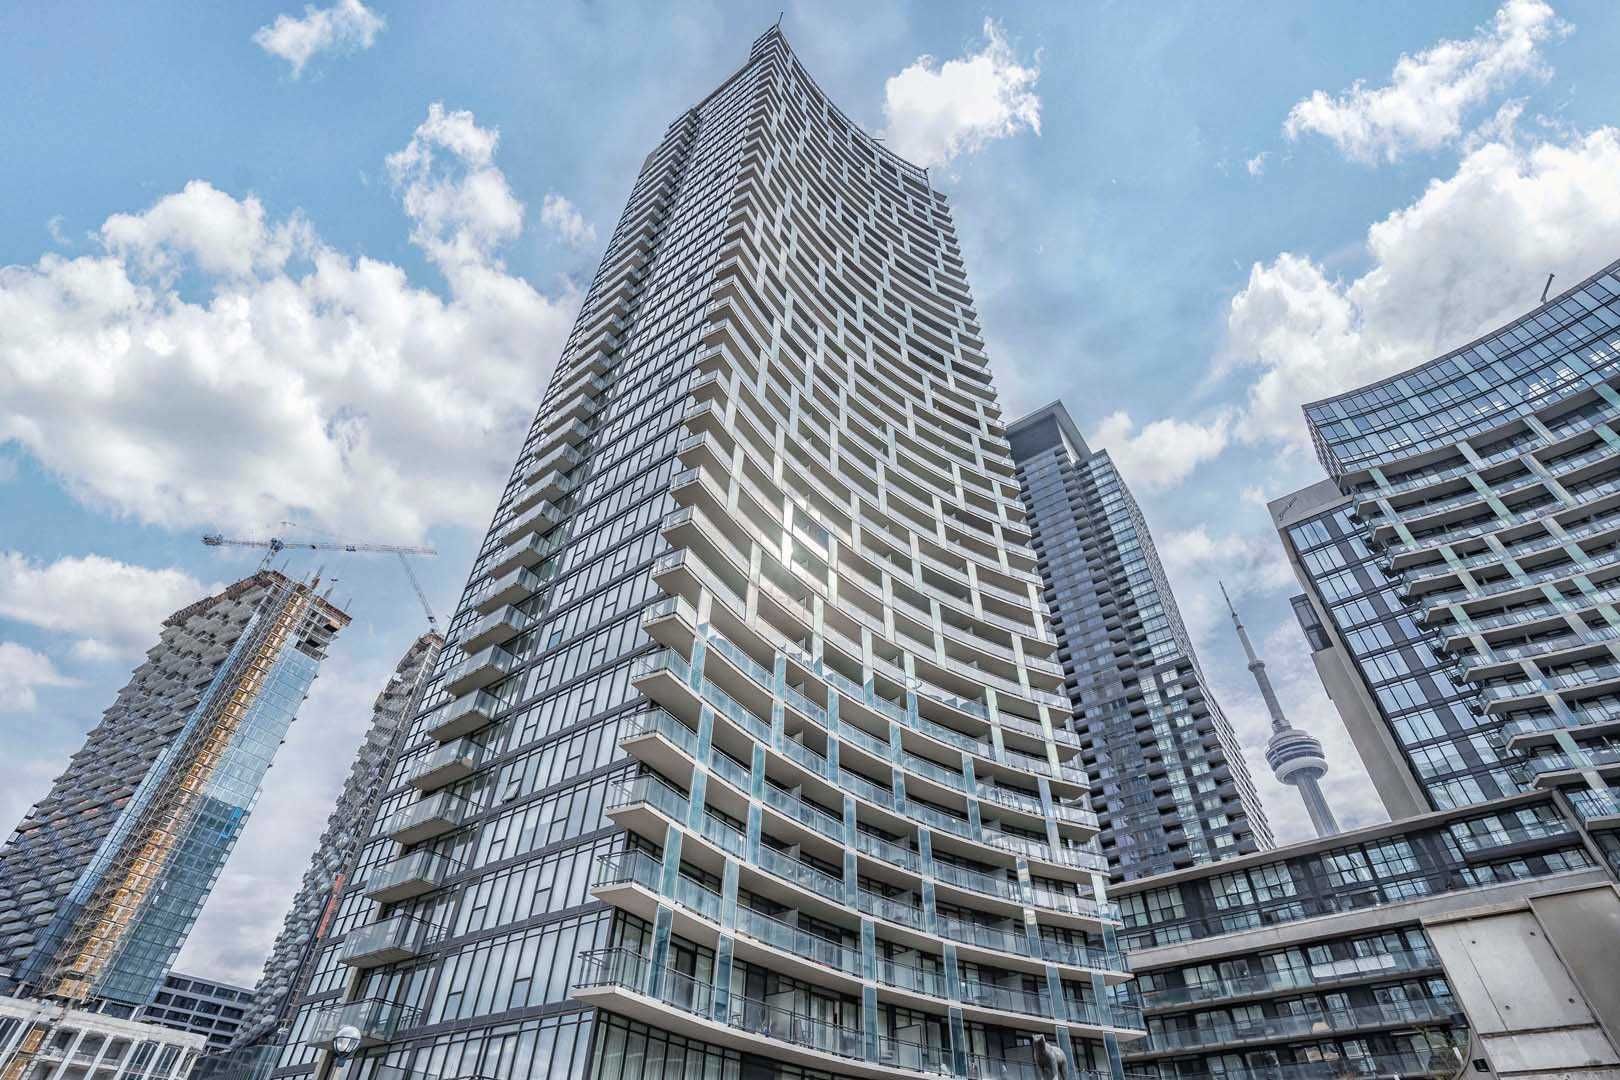 New property listed in Waterfront Communities C1, Toronto C01